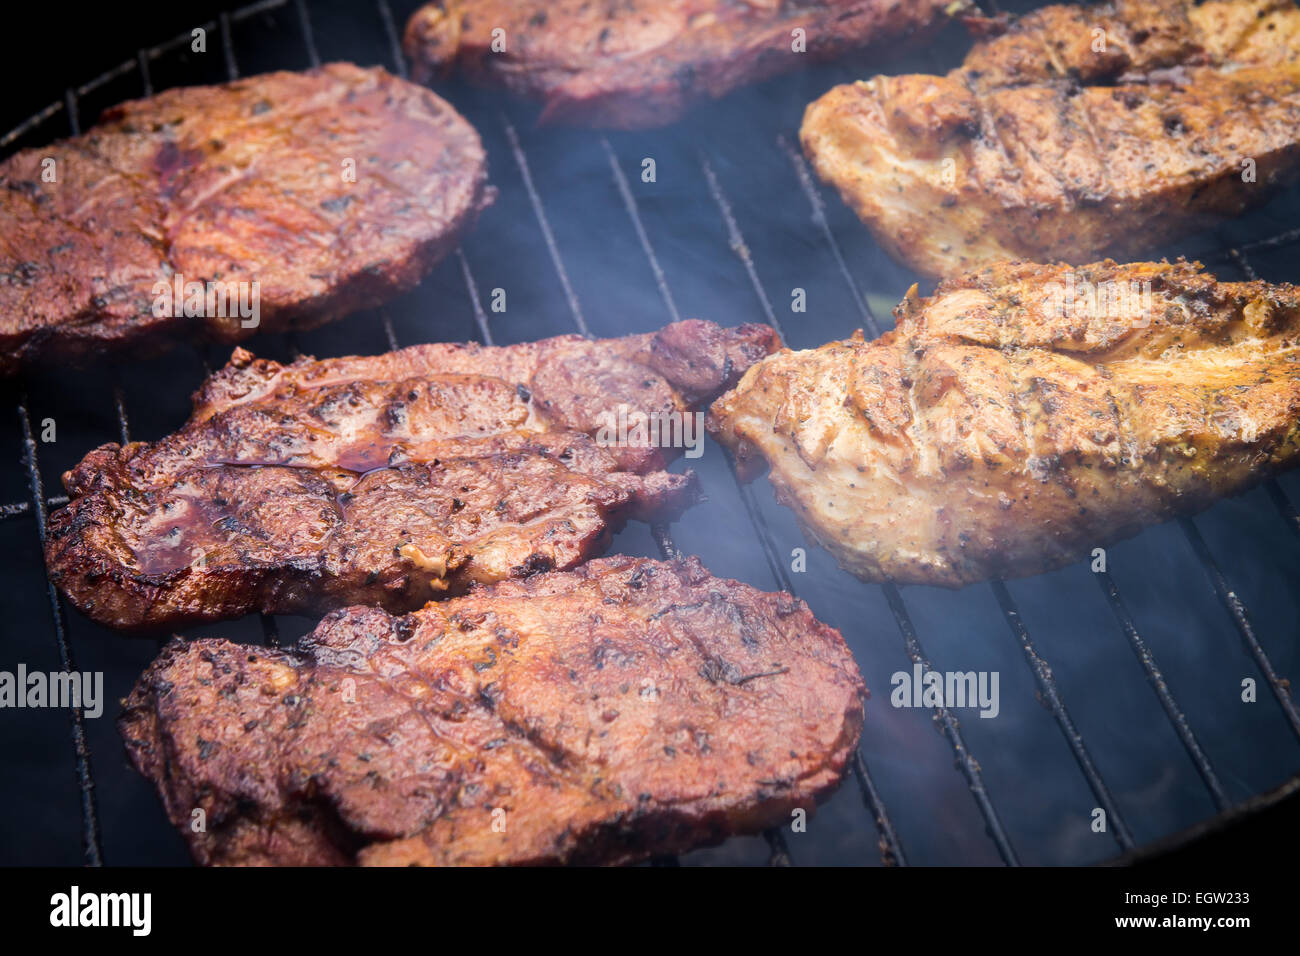 Grill Beef Steak Barbecue Stock Photo Alamy